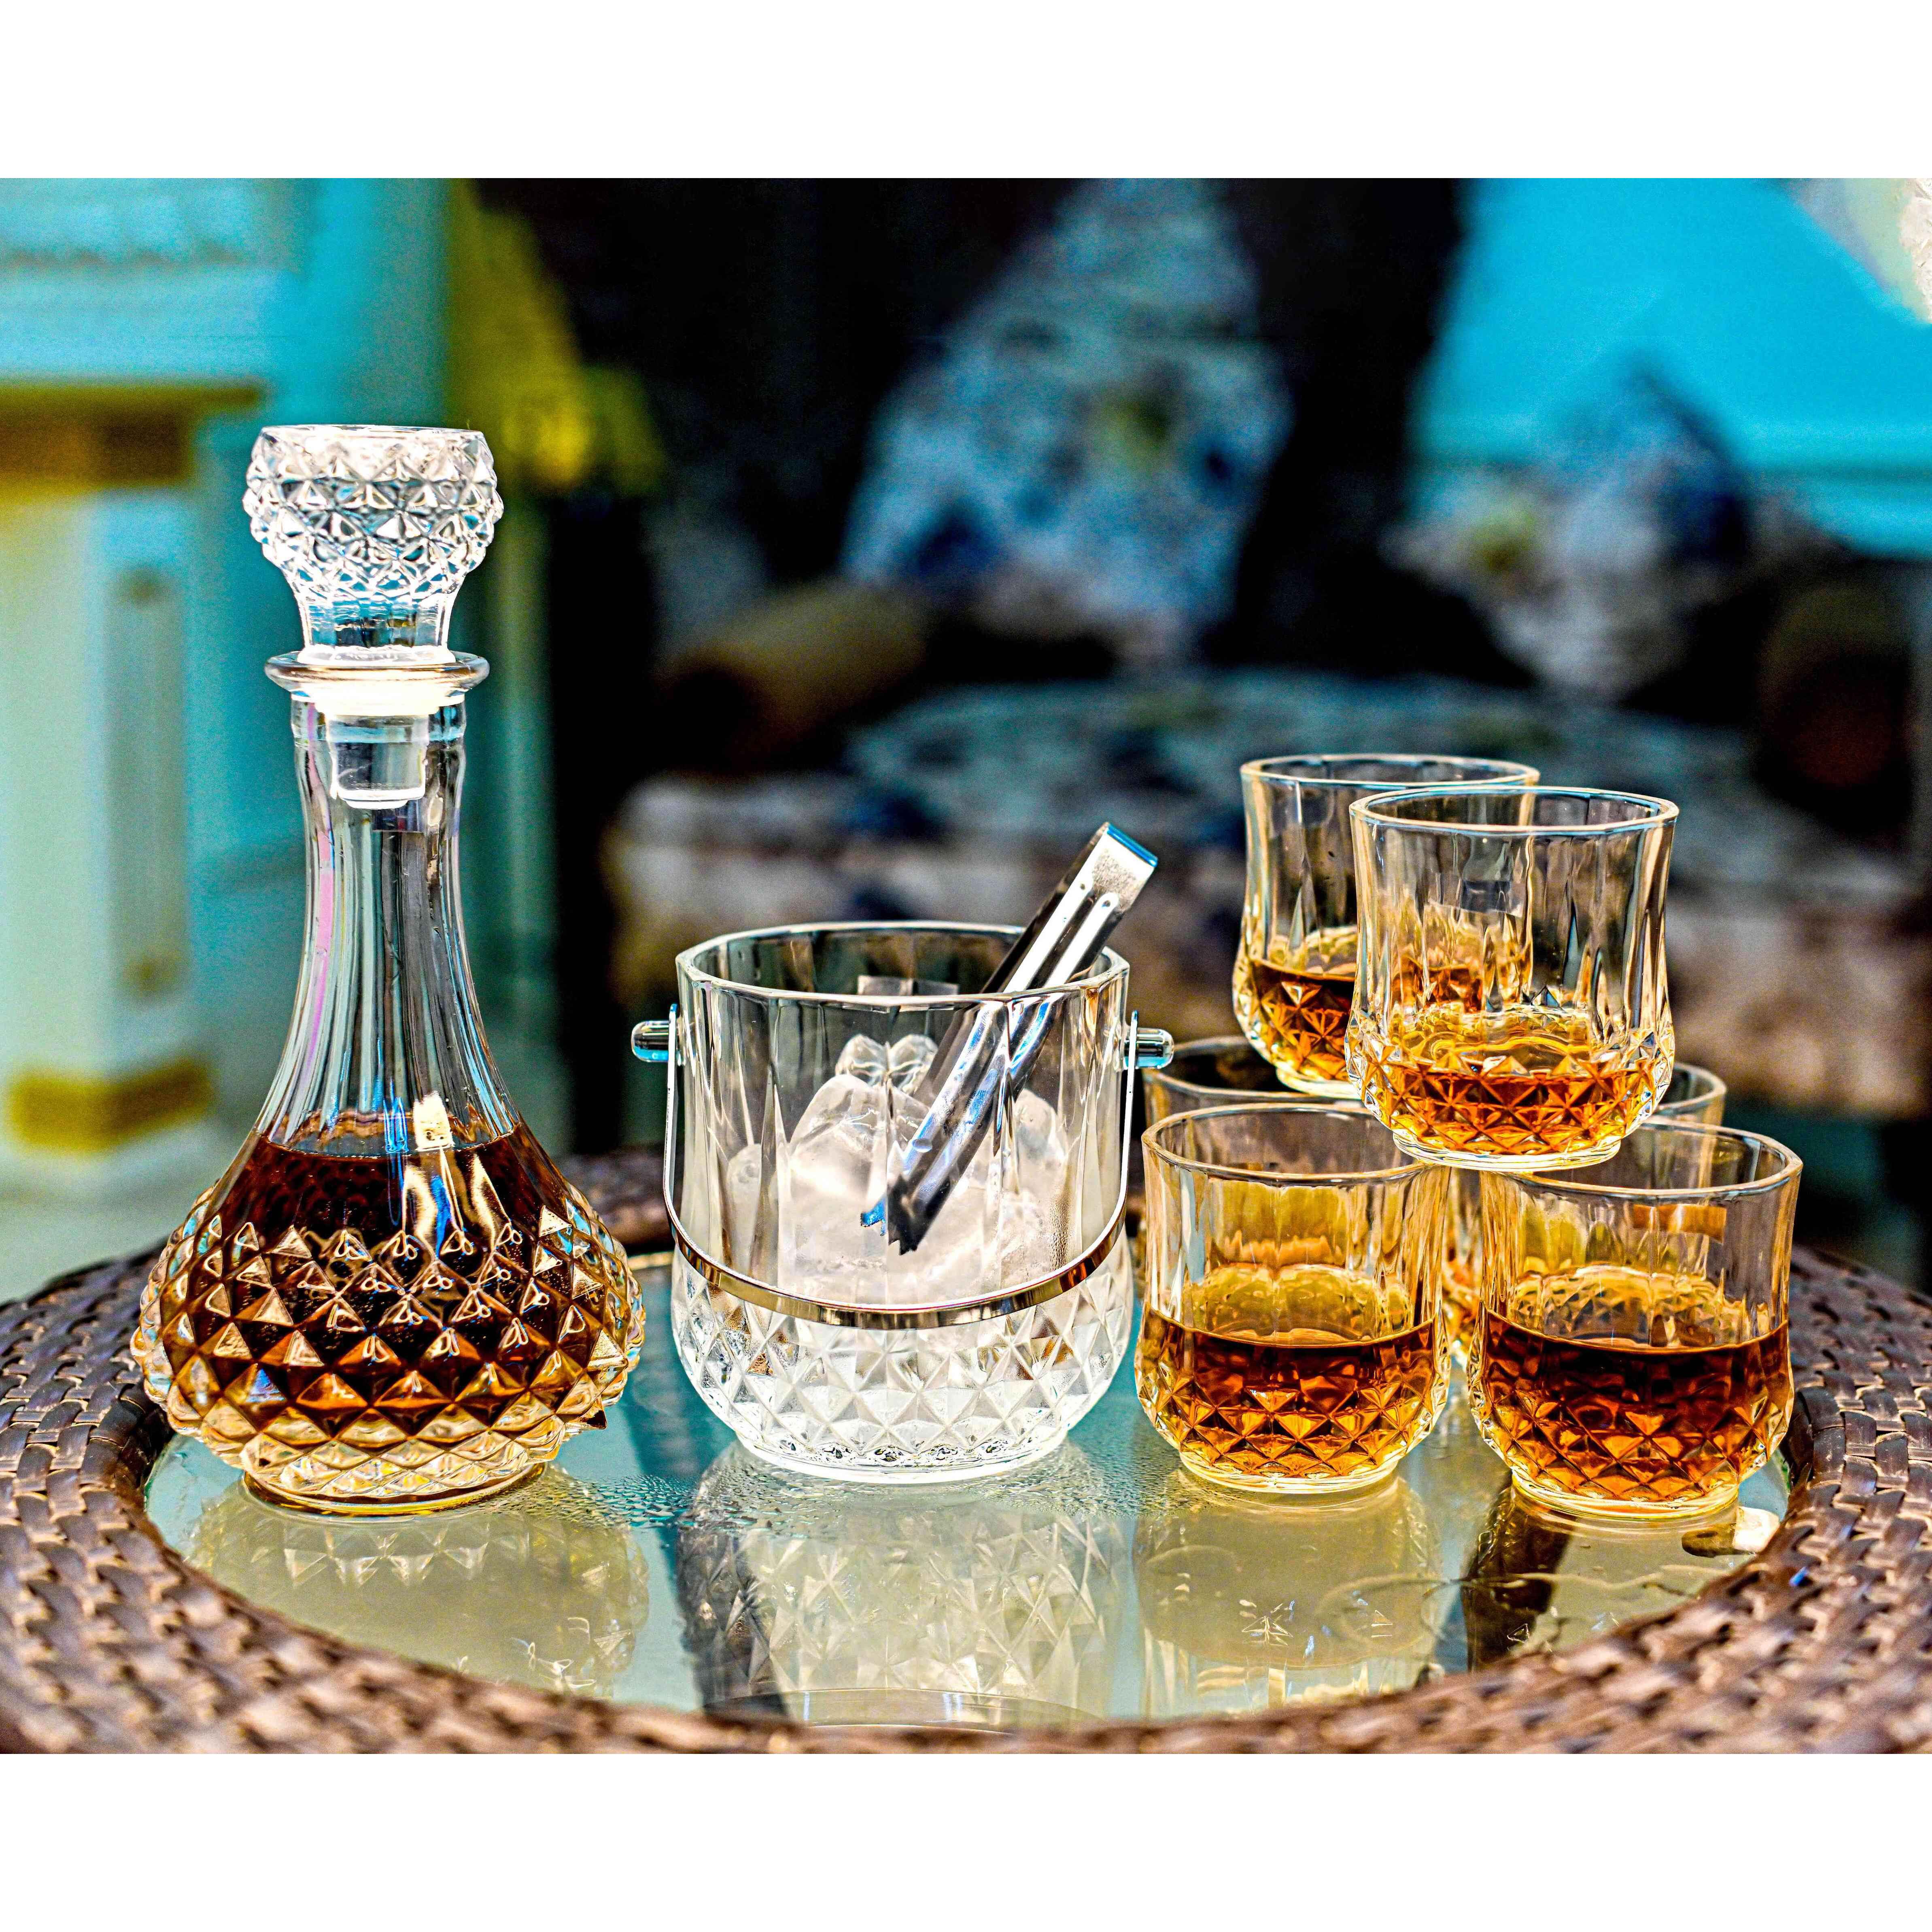 Opera Decanter Set With Glass